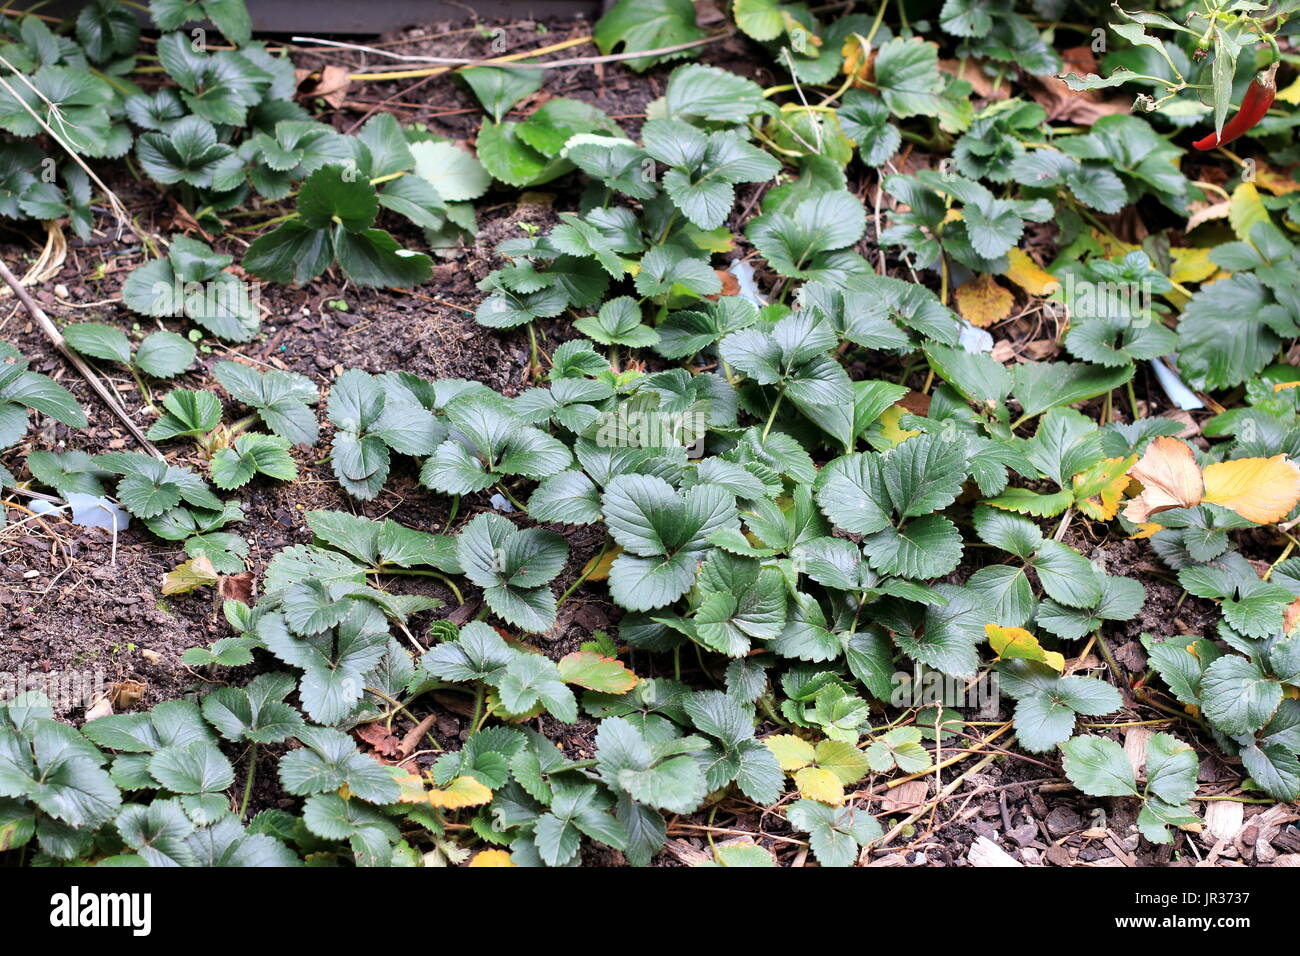 Home grown strawberry runners growing on the ground Stock Photo